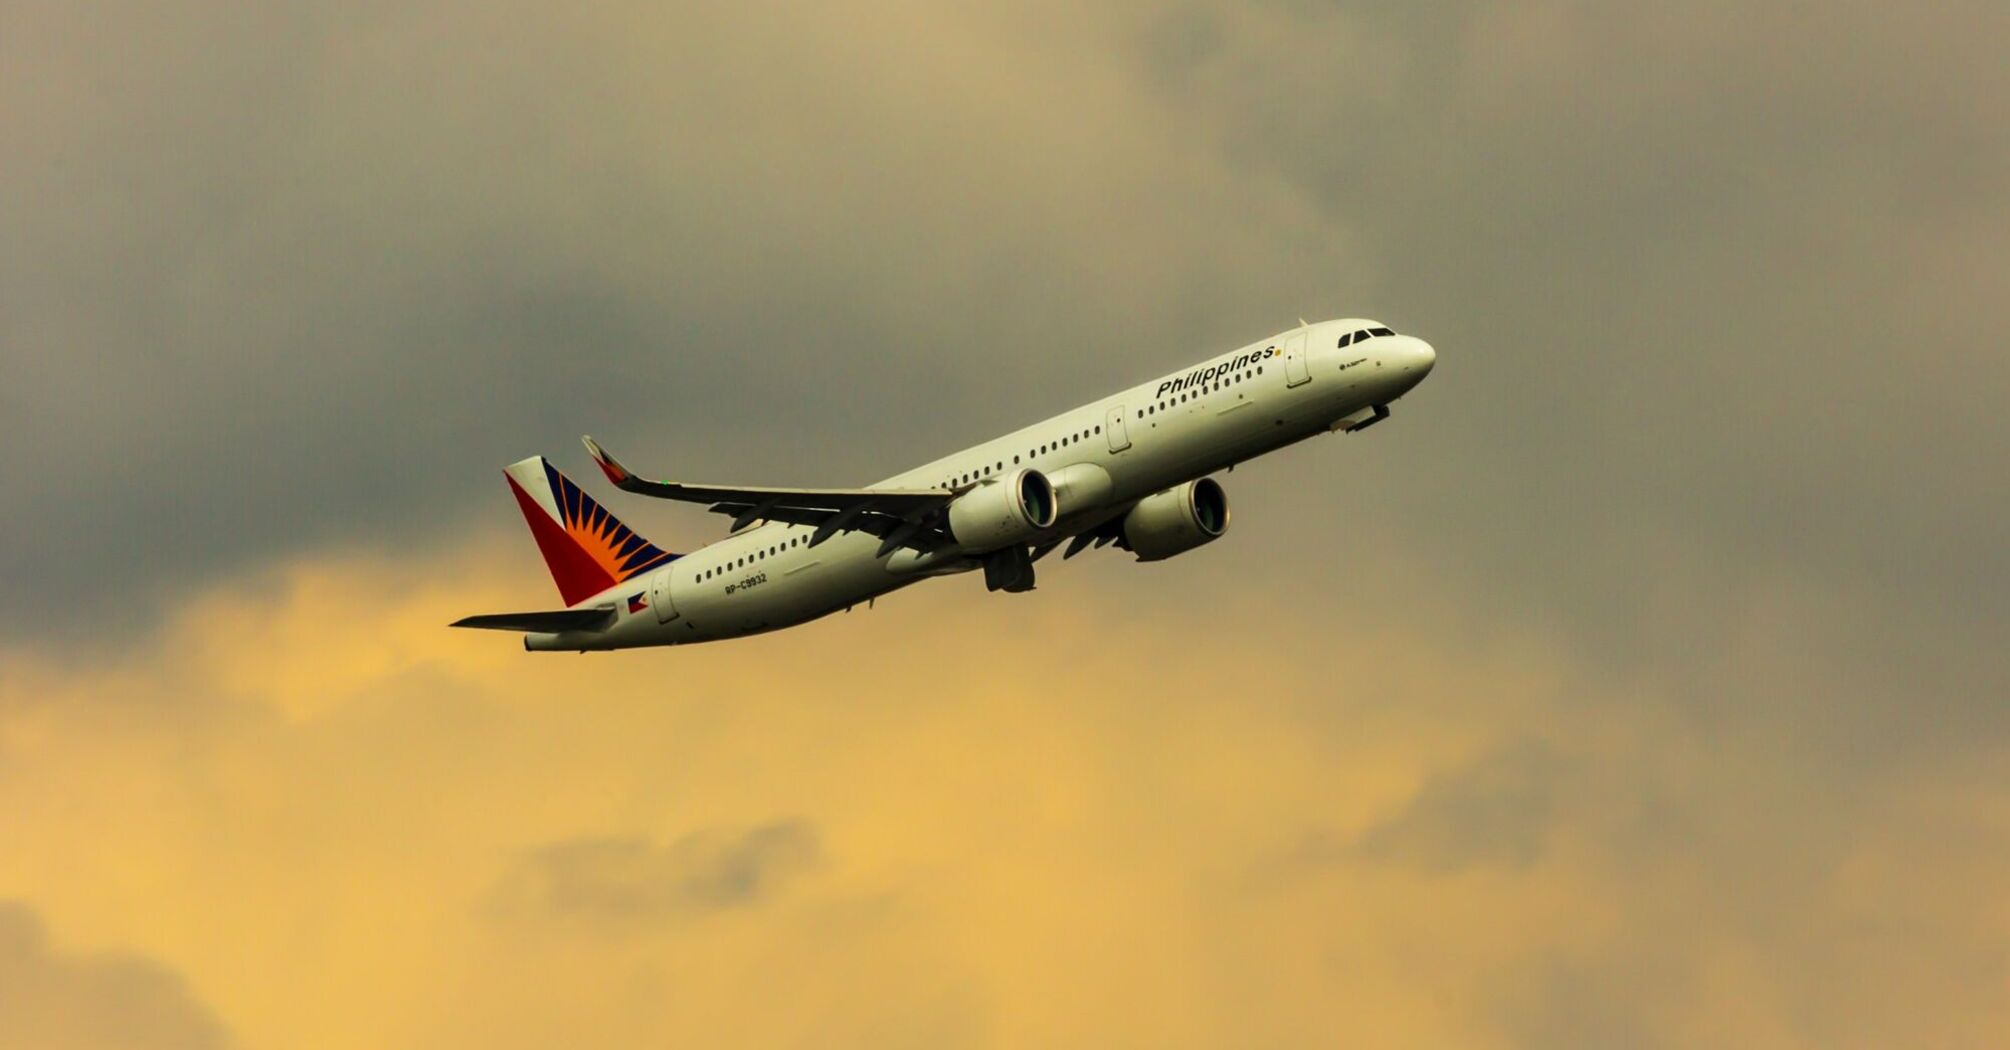 Philippines aircraft takes off at airport